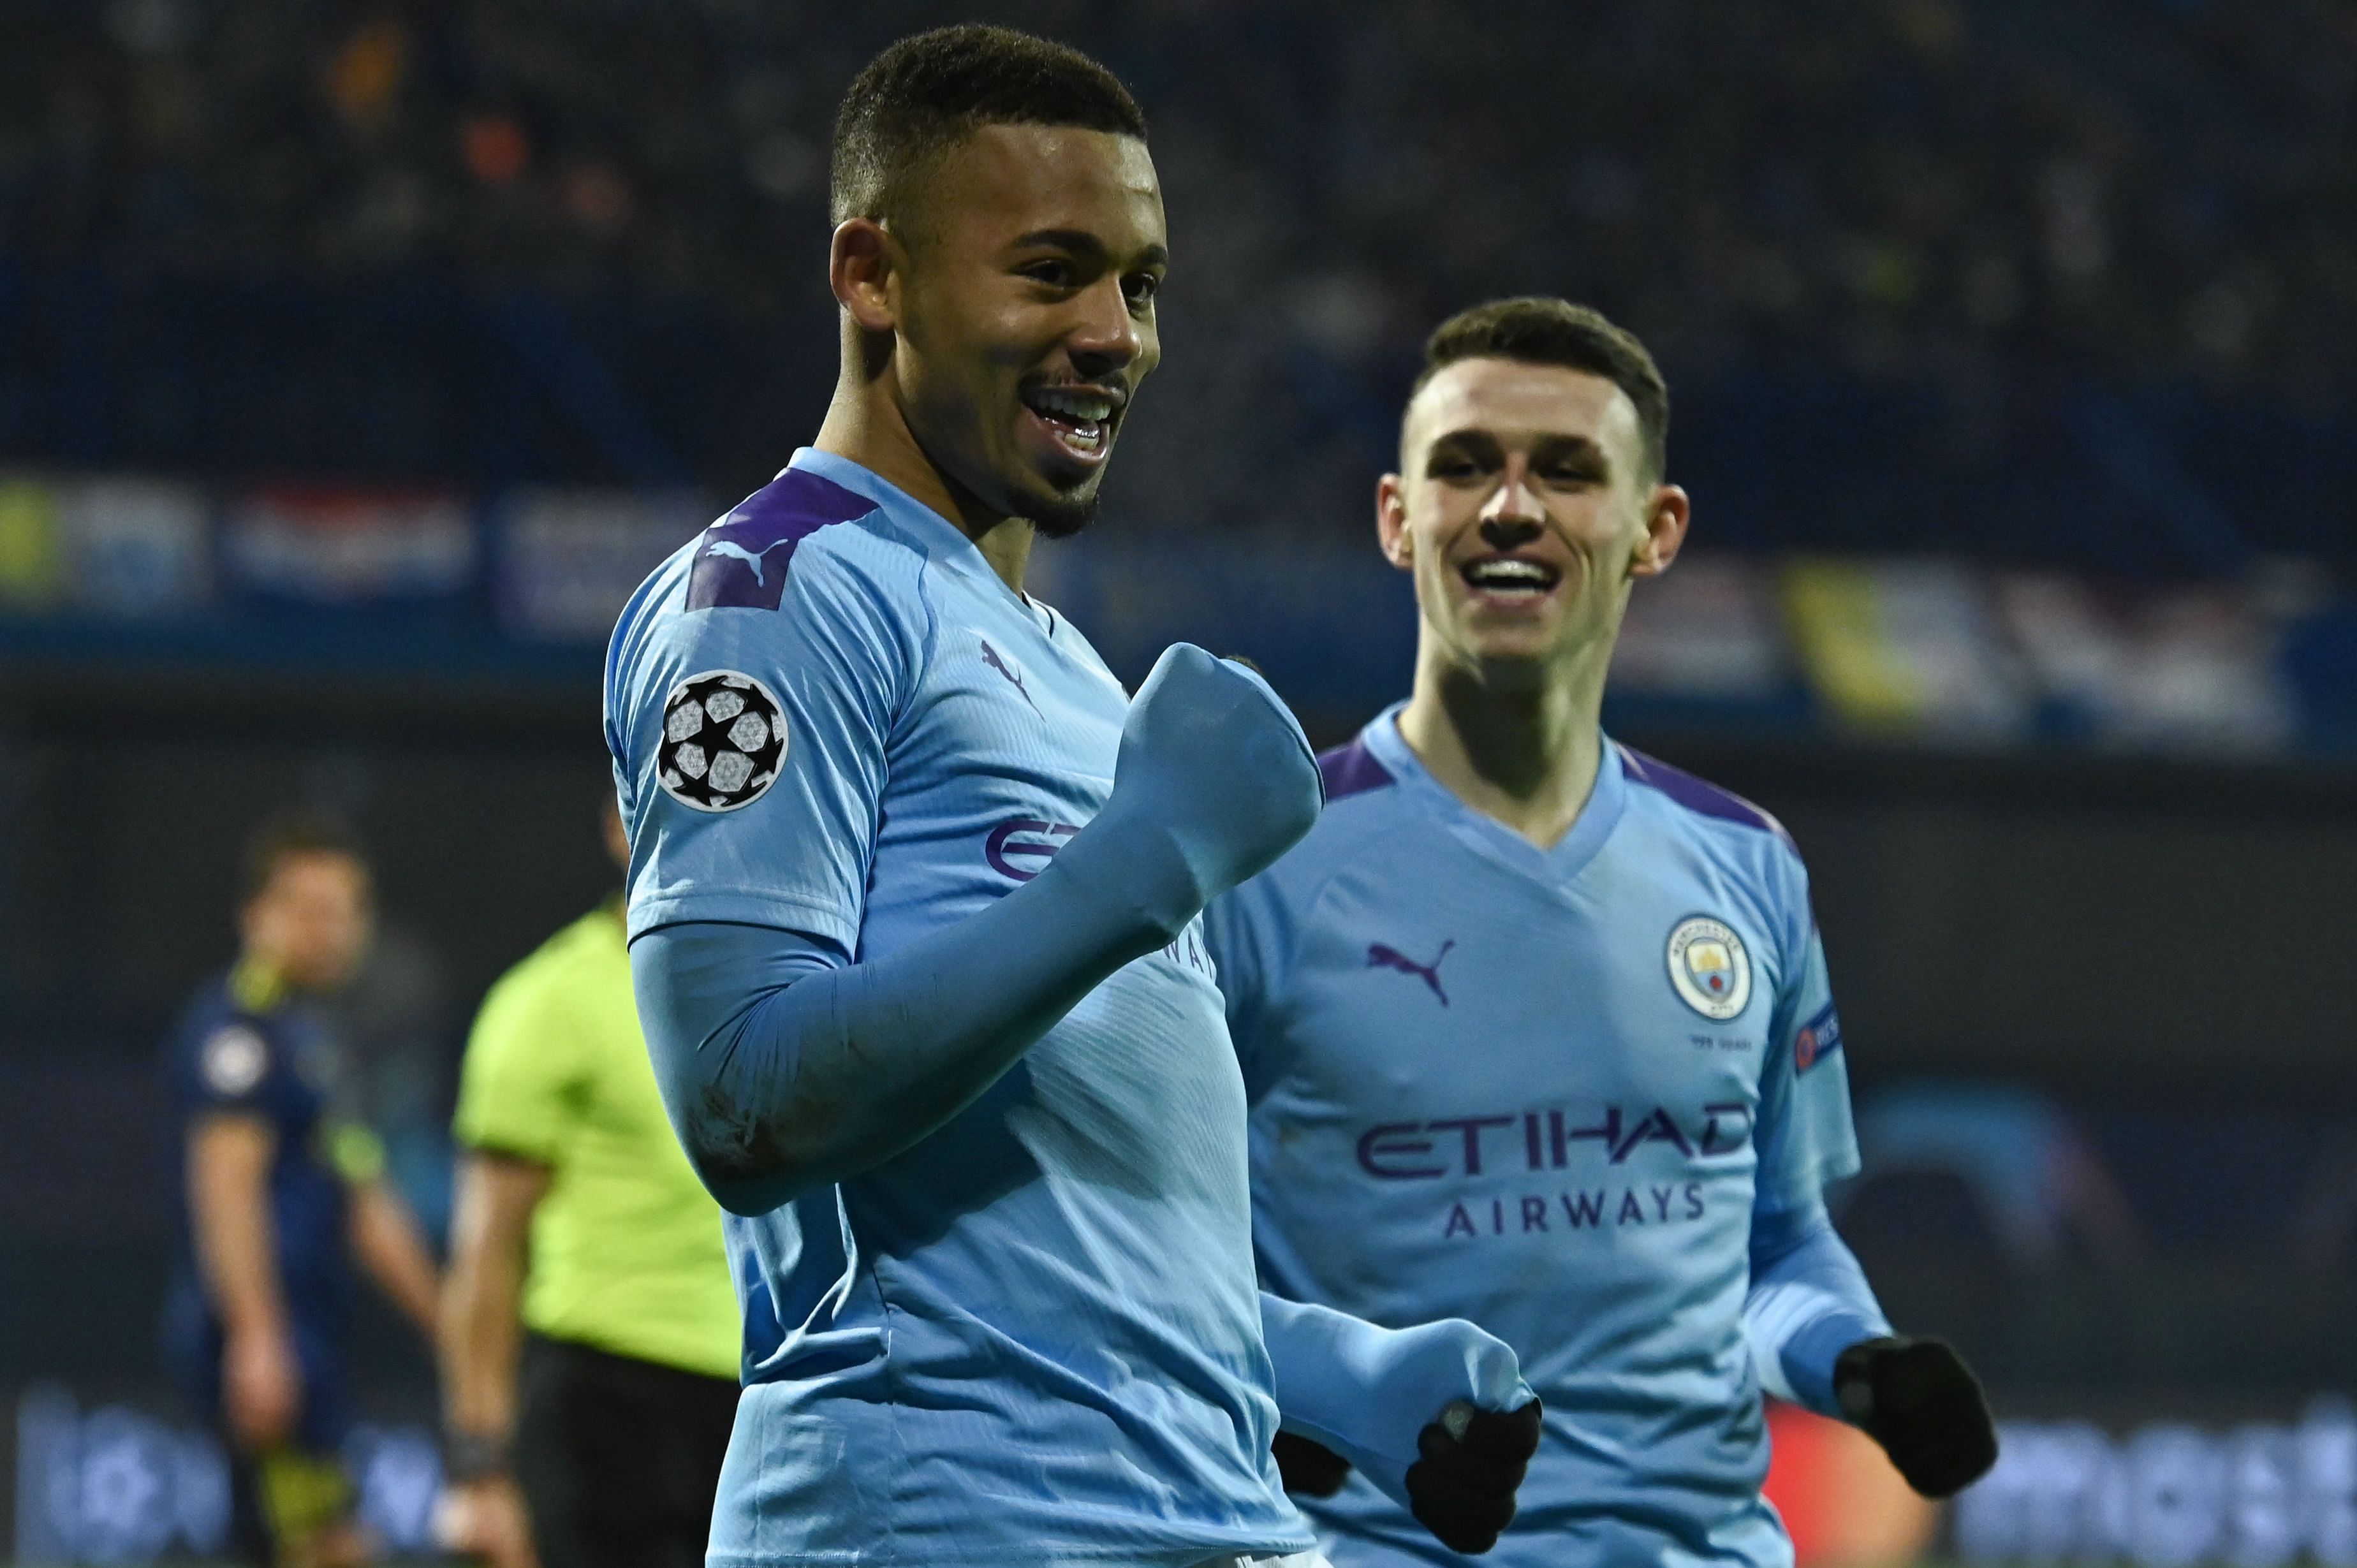 Manchester City's Brazilian striker Gabriel Jesus (L) celebrates after scoring a goal during the UEFA Champions League Group C football match between GNK Dinamo Zagreb and Manchester City FC at the Maksimir Stadium in Zagreb. (AFP Photo)